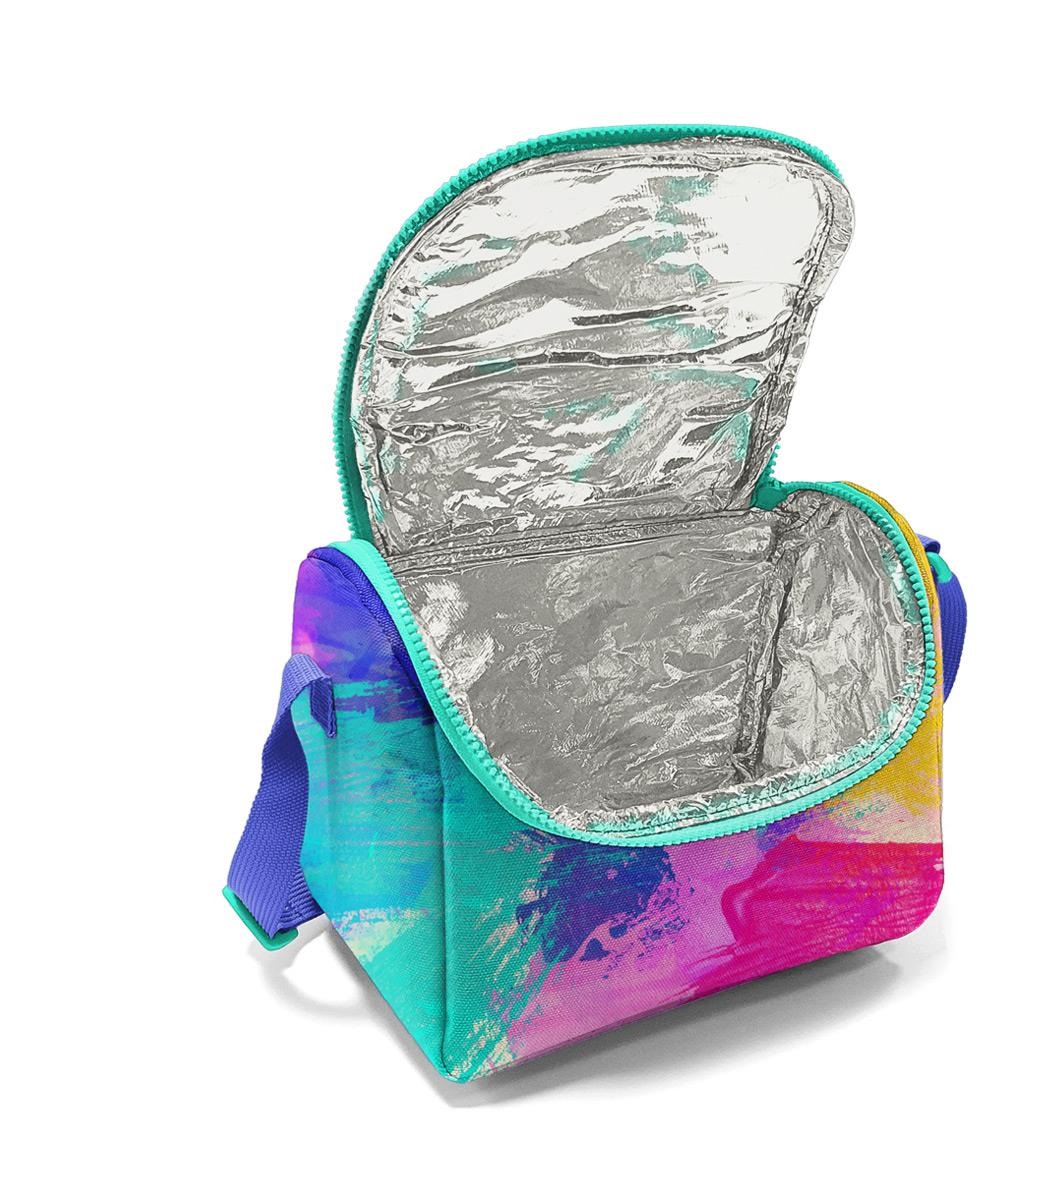 Coral High Kids Thermal Lunch Bag - Colorful Airbrush Patterned